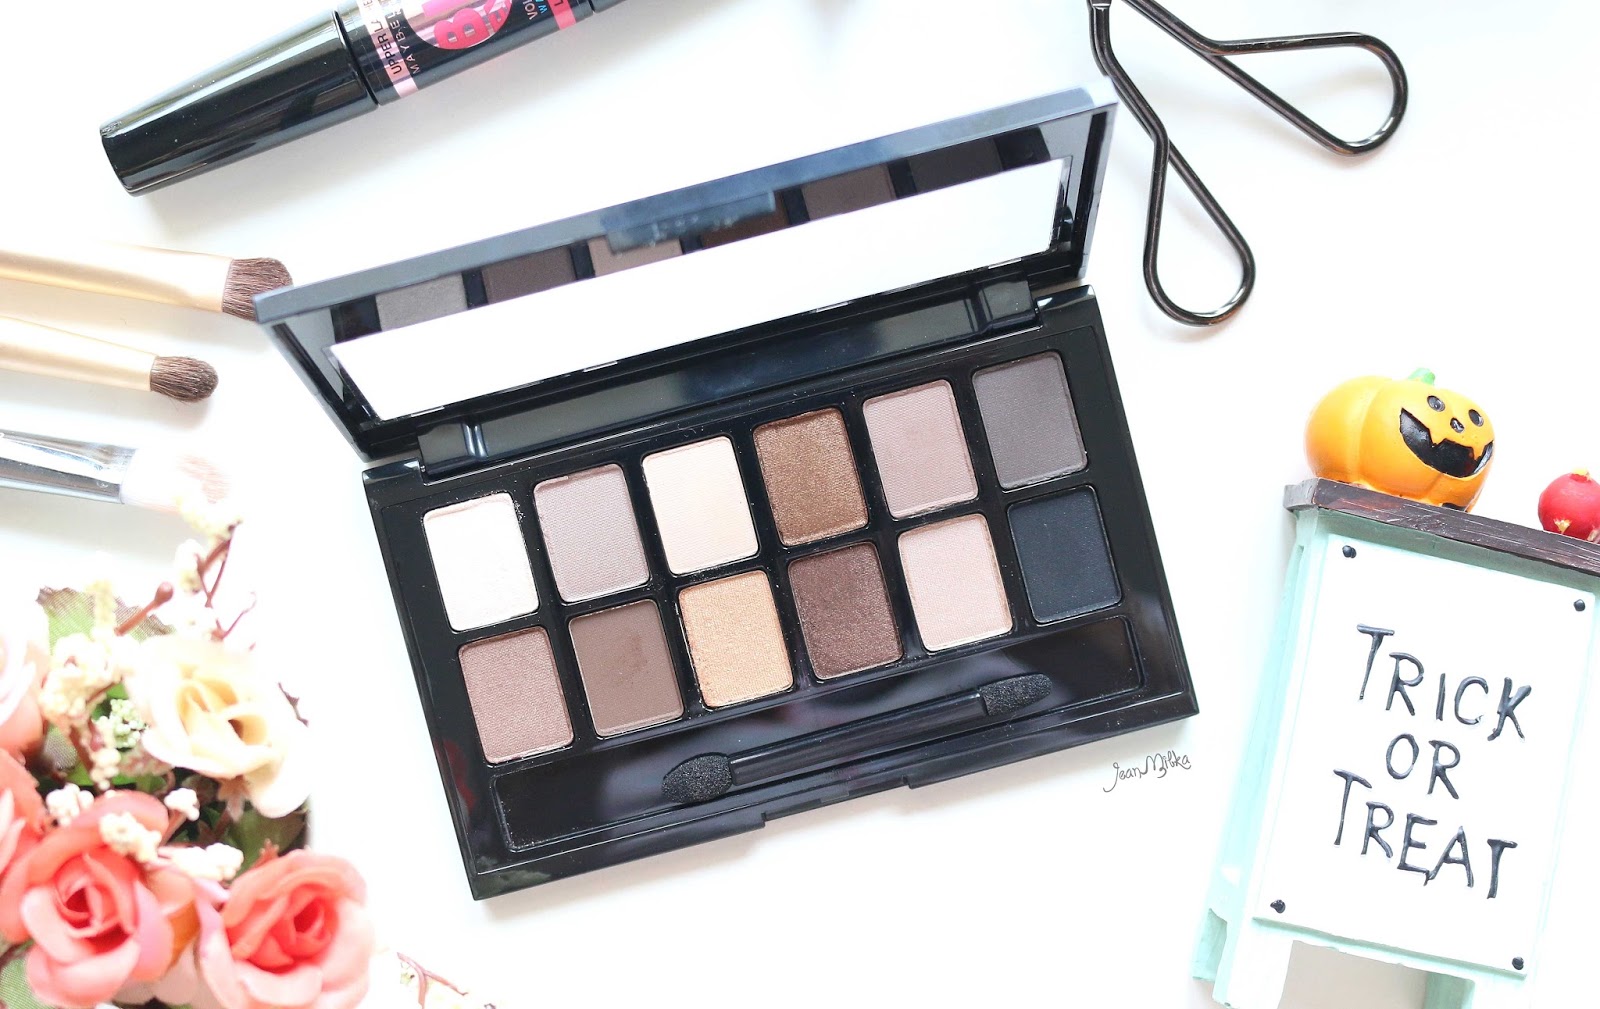 maybelline, the nudes, palette, eyeshadow, review, swatch, drugstore, maybelline the nudes, eyeshadow palette, beauty, makeup